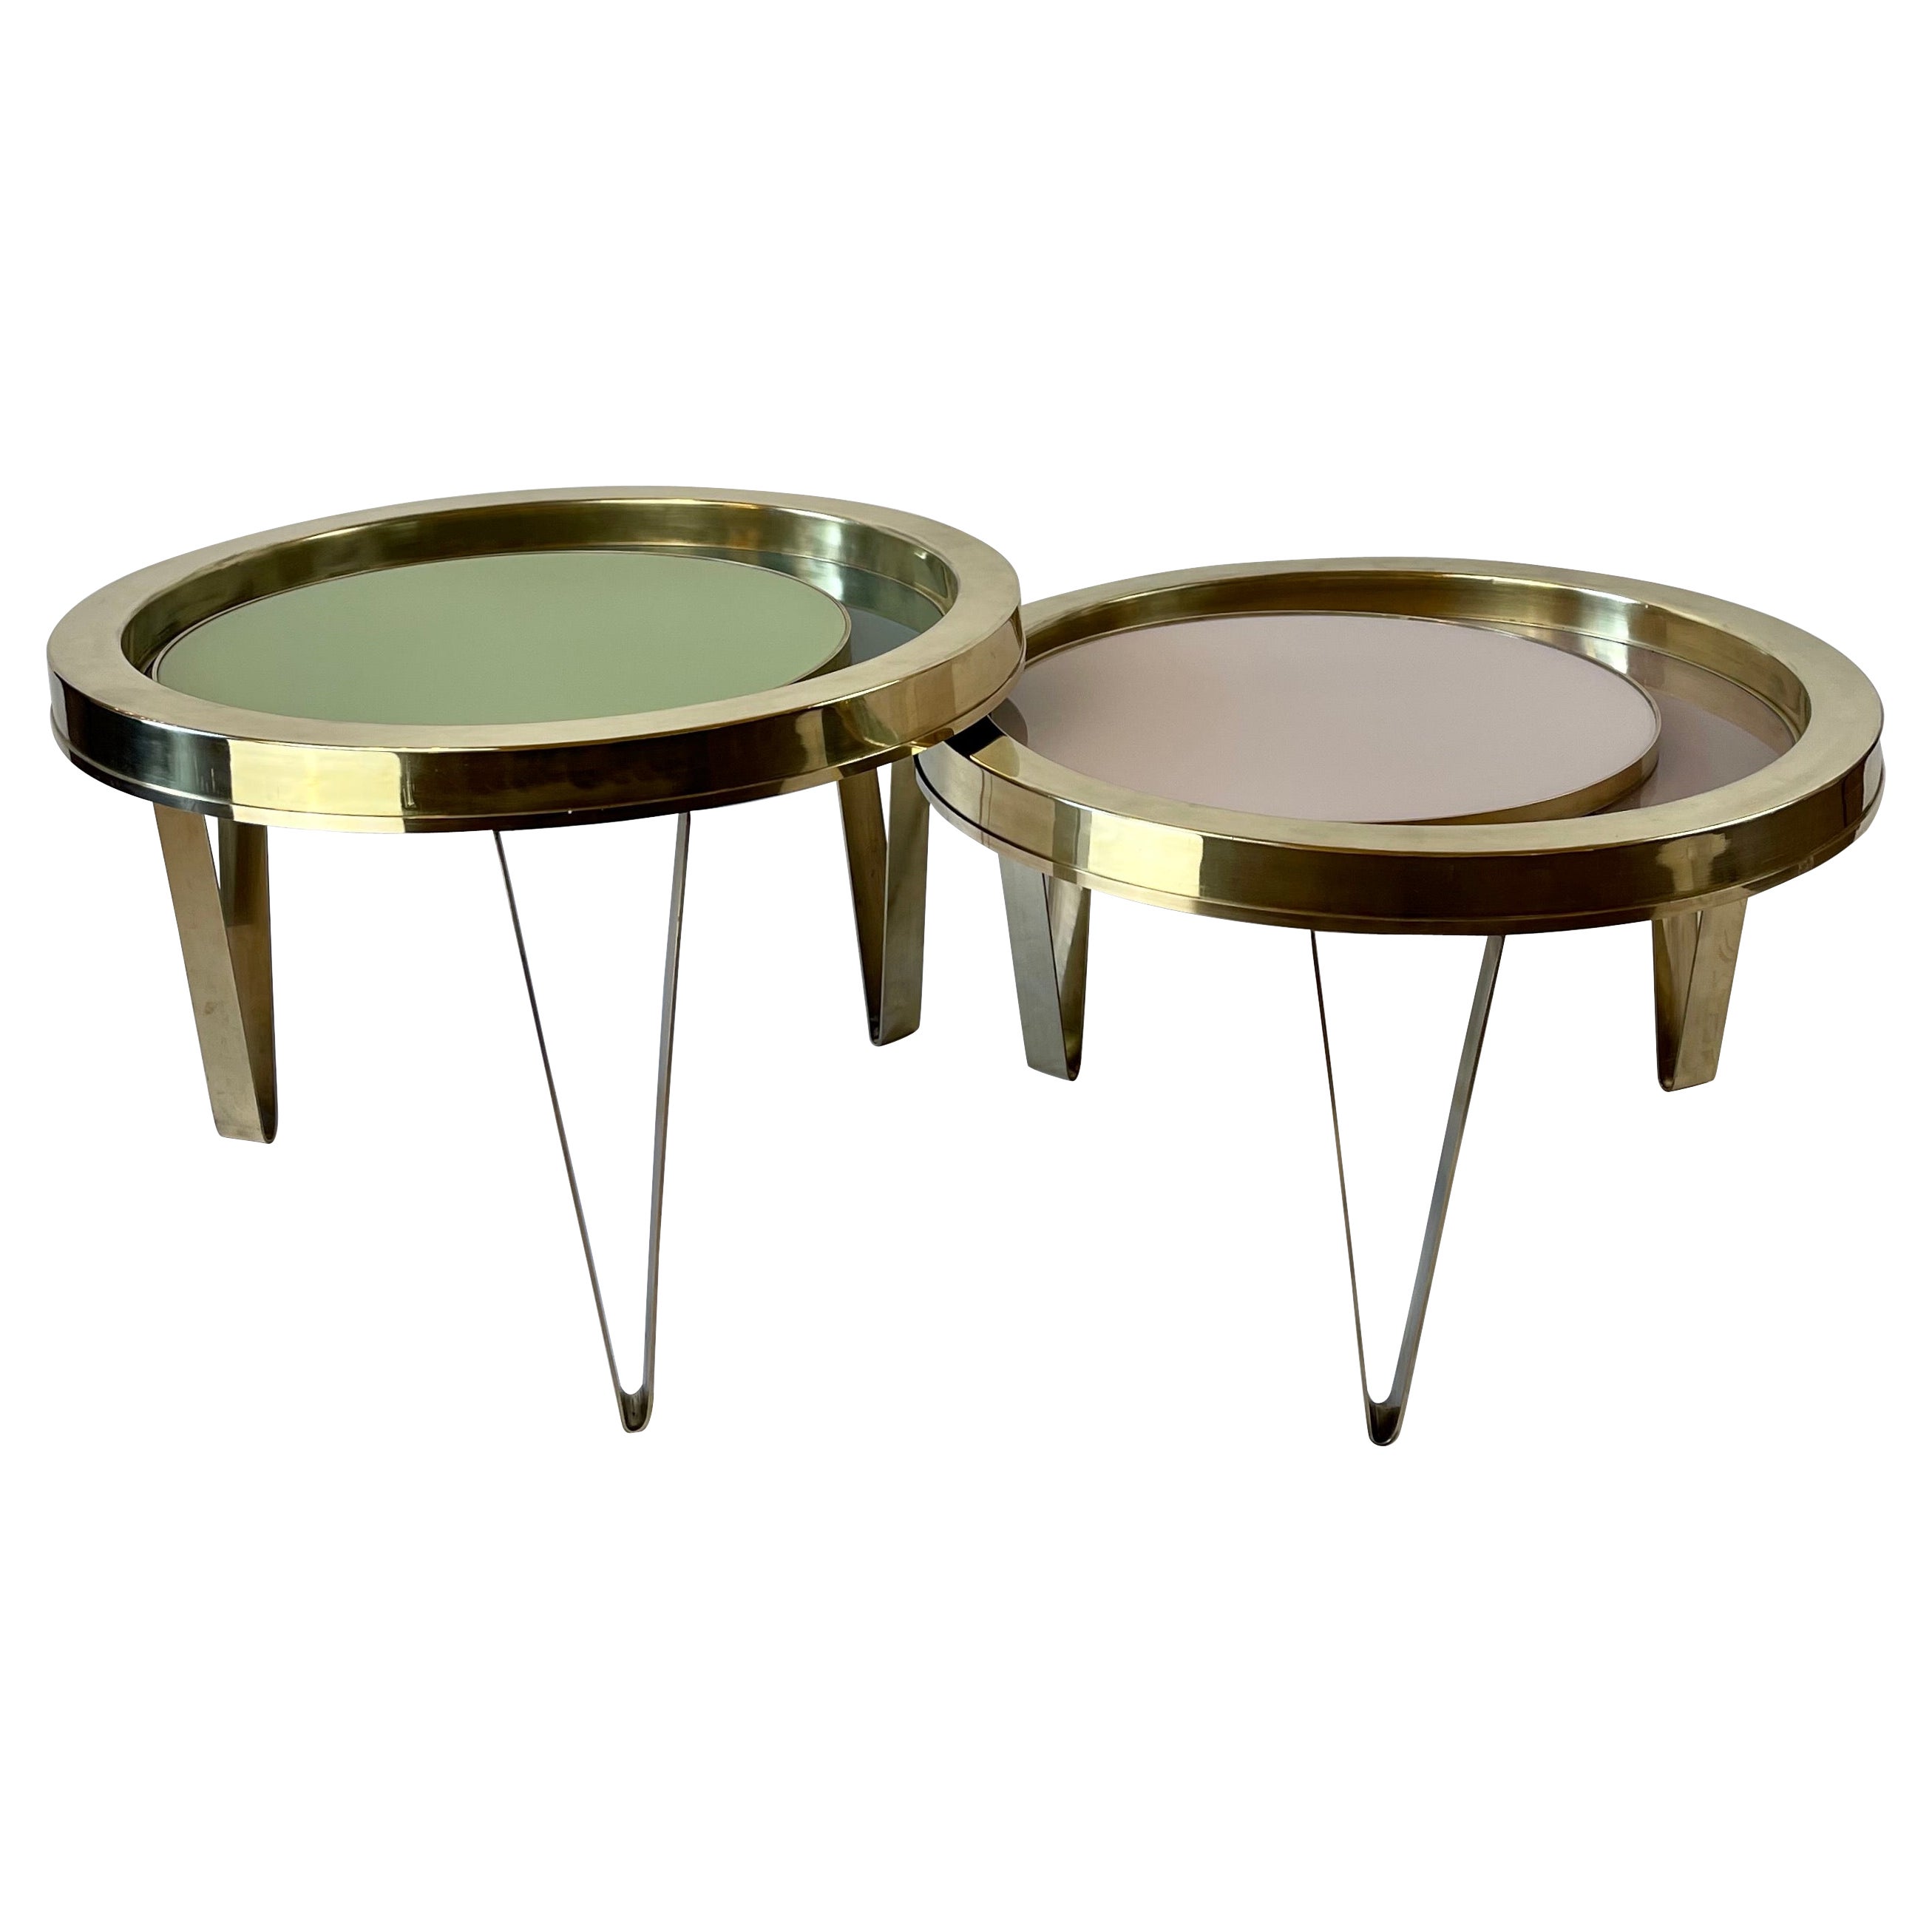 Late 20th Century Set of Two Round Brass Coffee Tables w/ Opaline Glass Tops For Sale